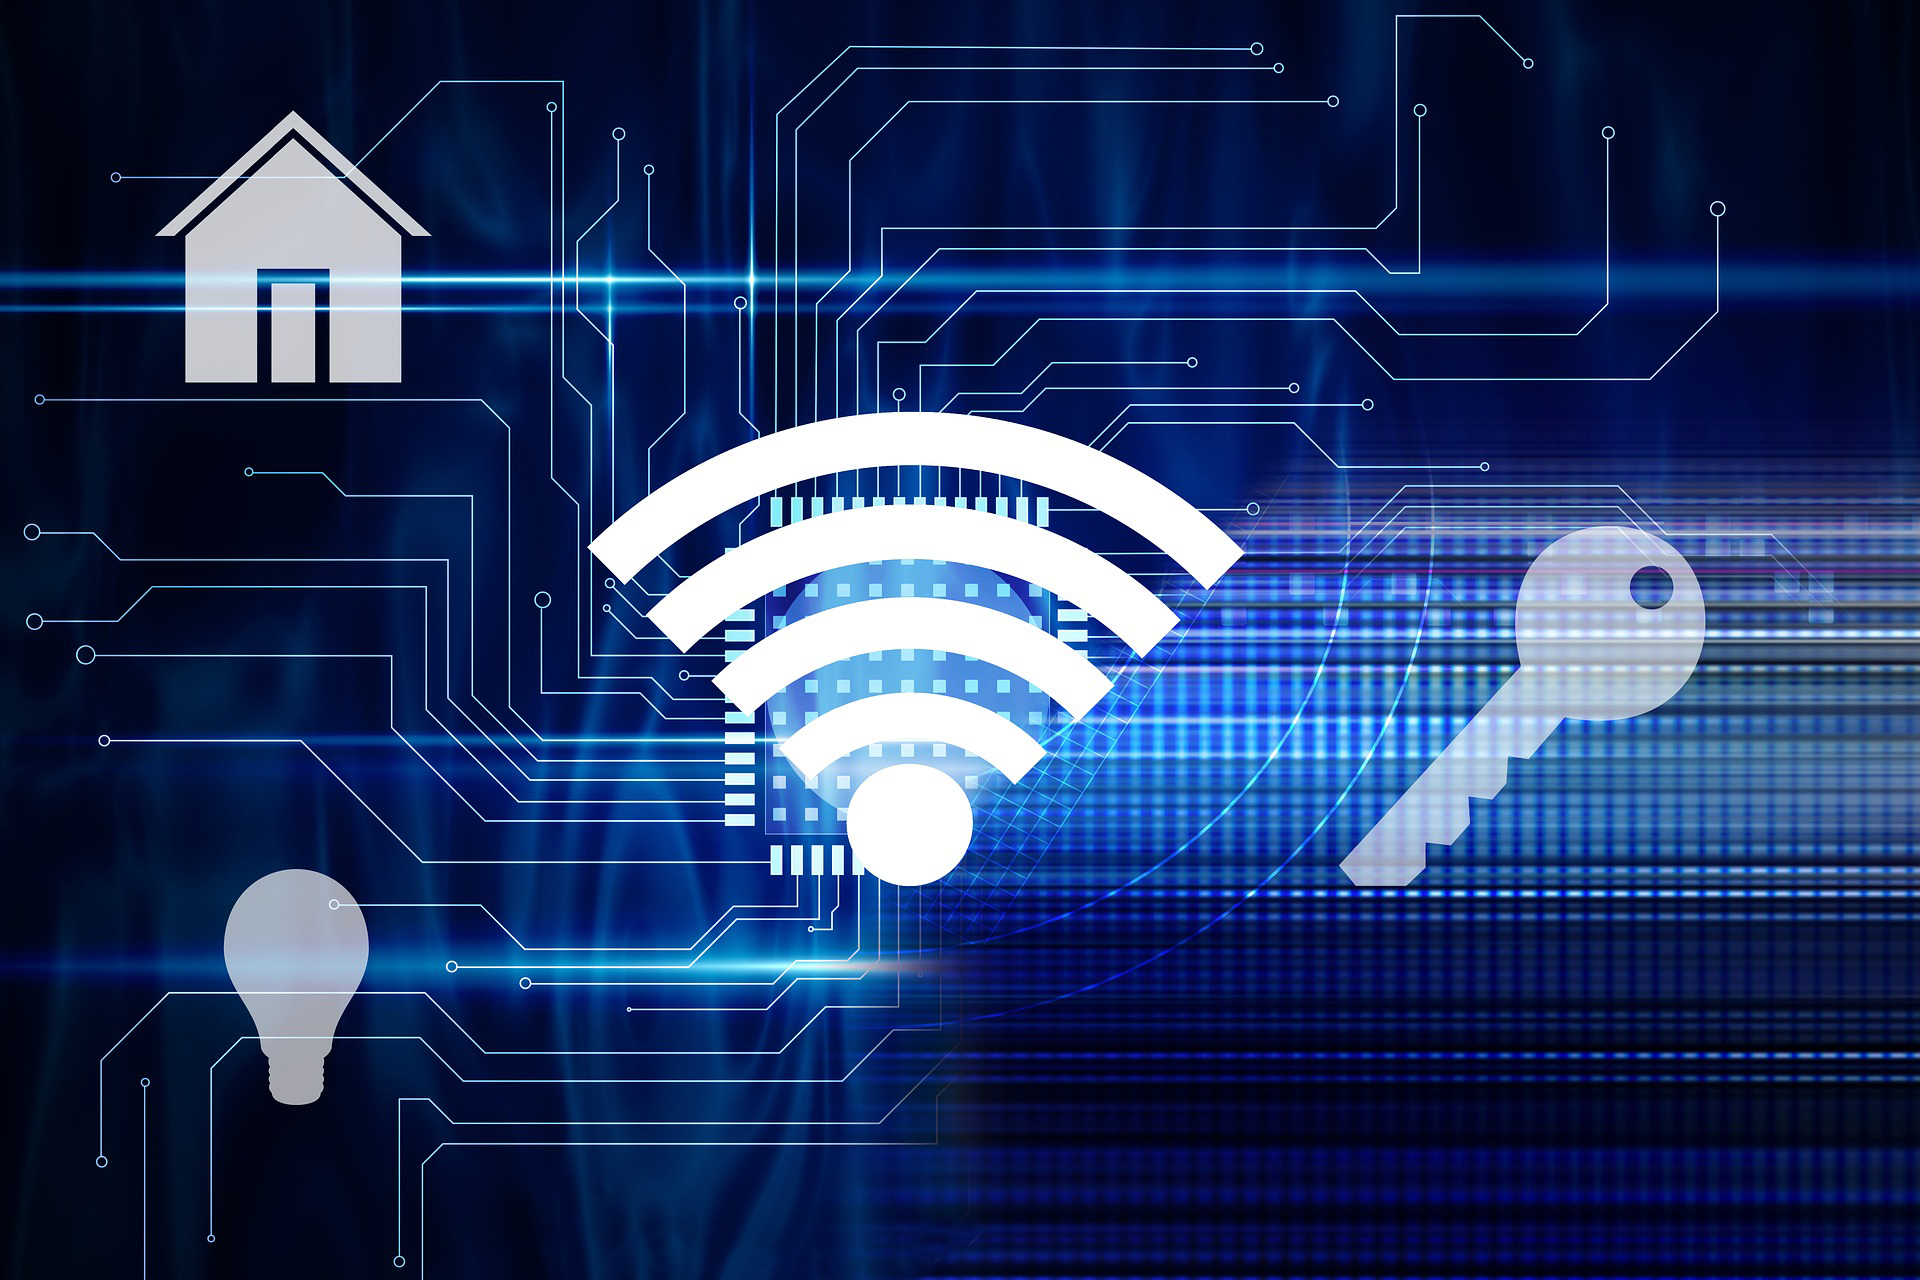 Security Precautions We Need to Take Before IoT Reaches its Maximum Potential